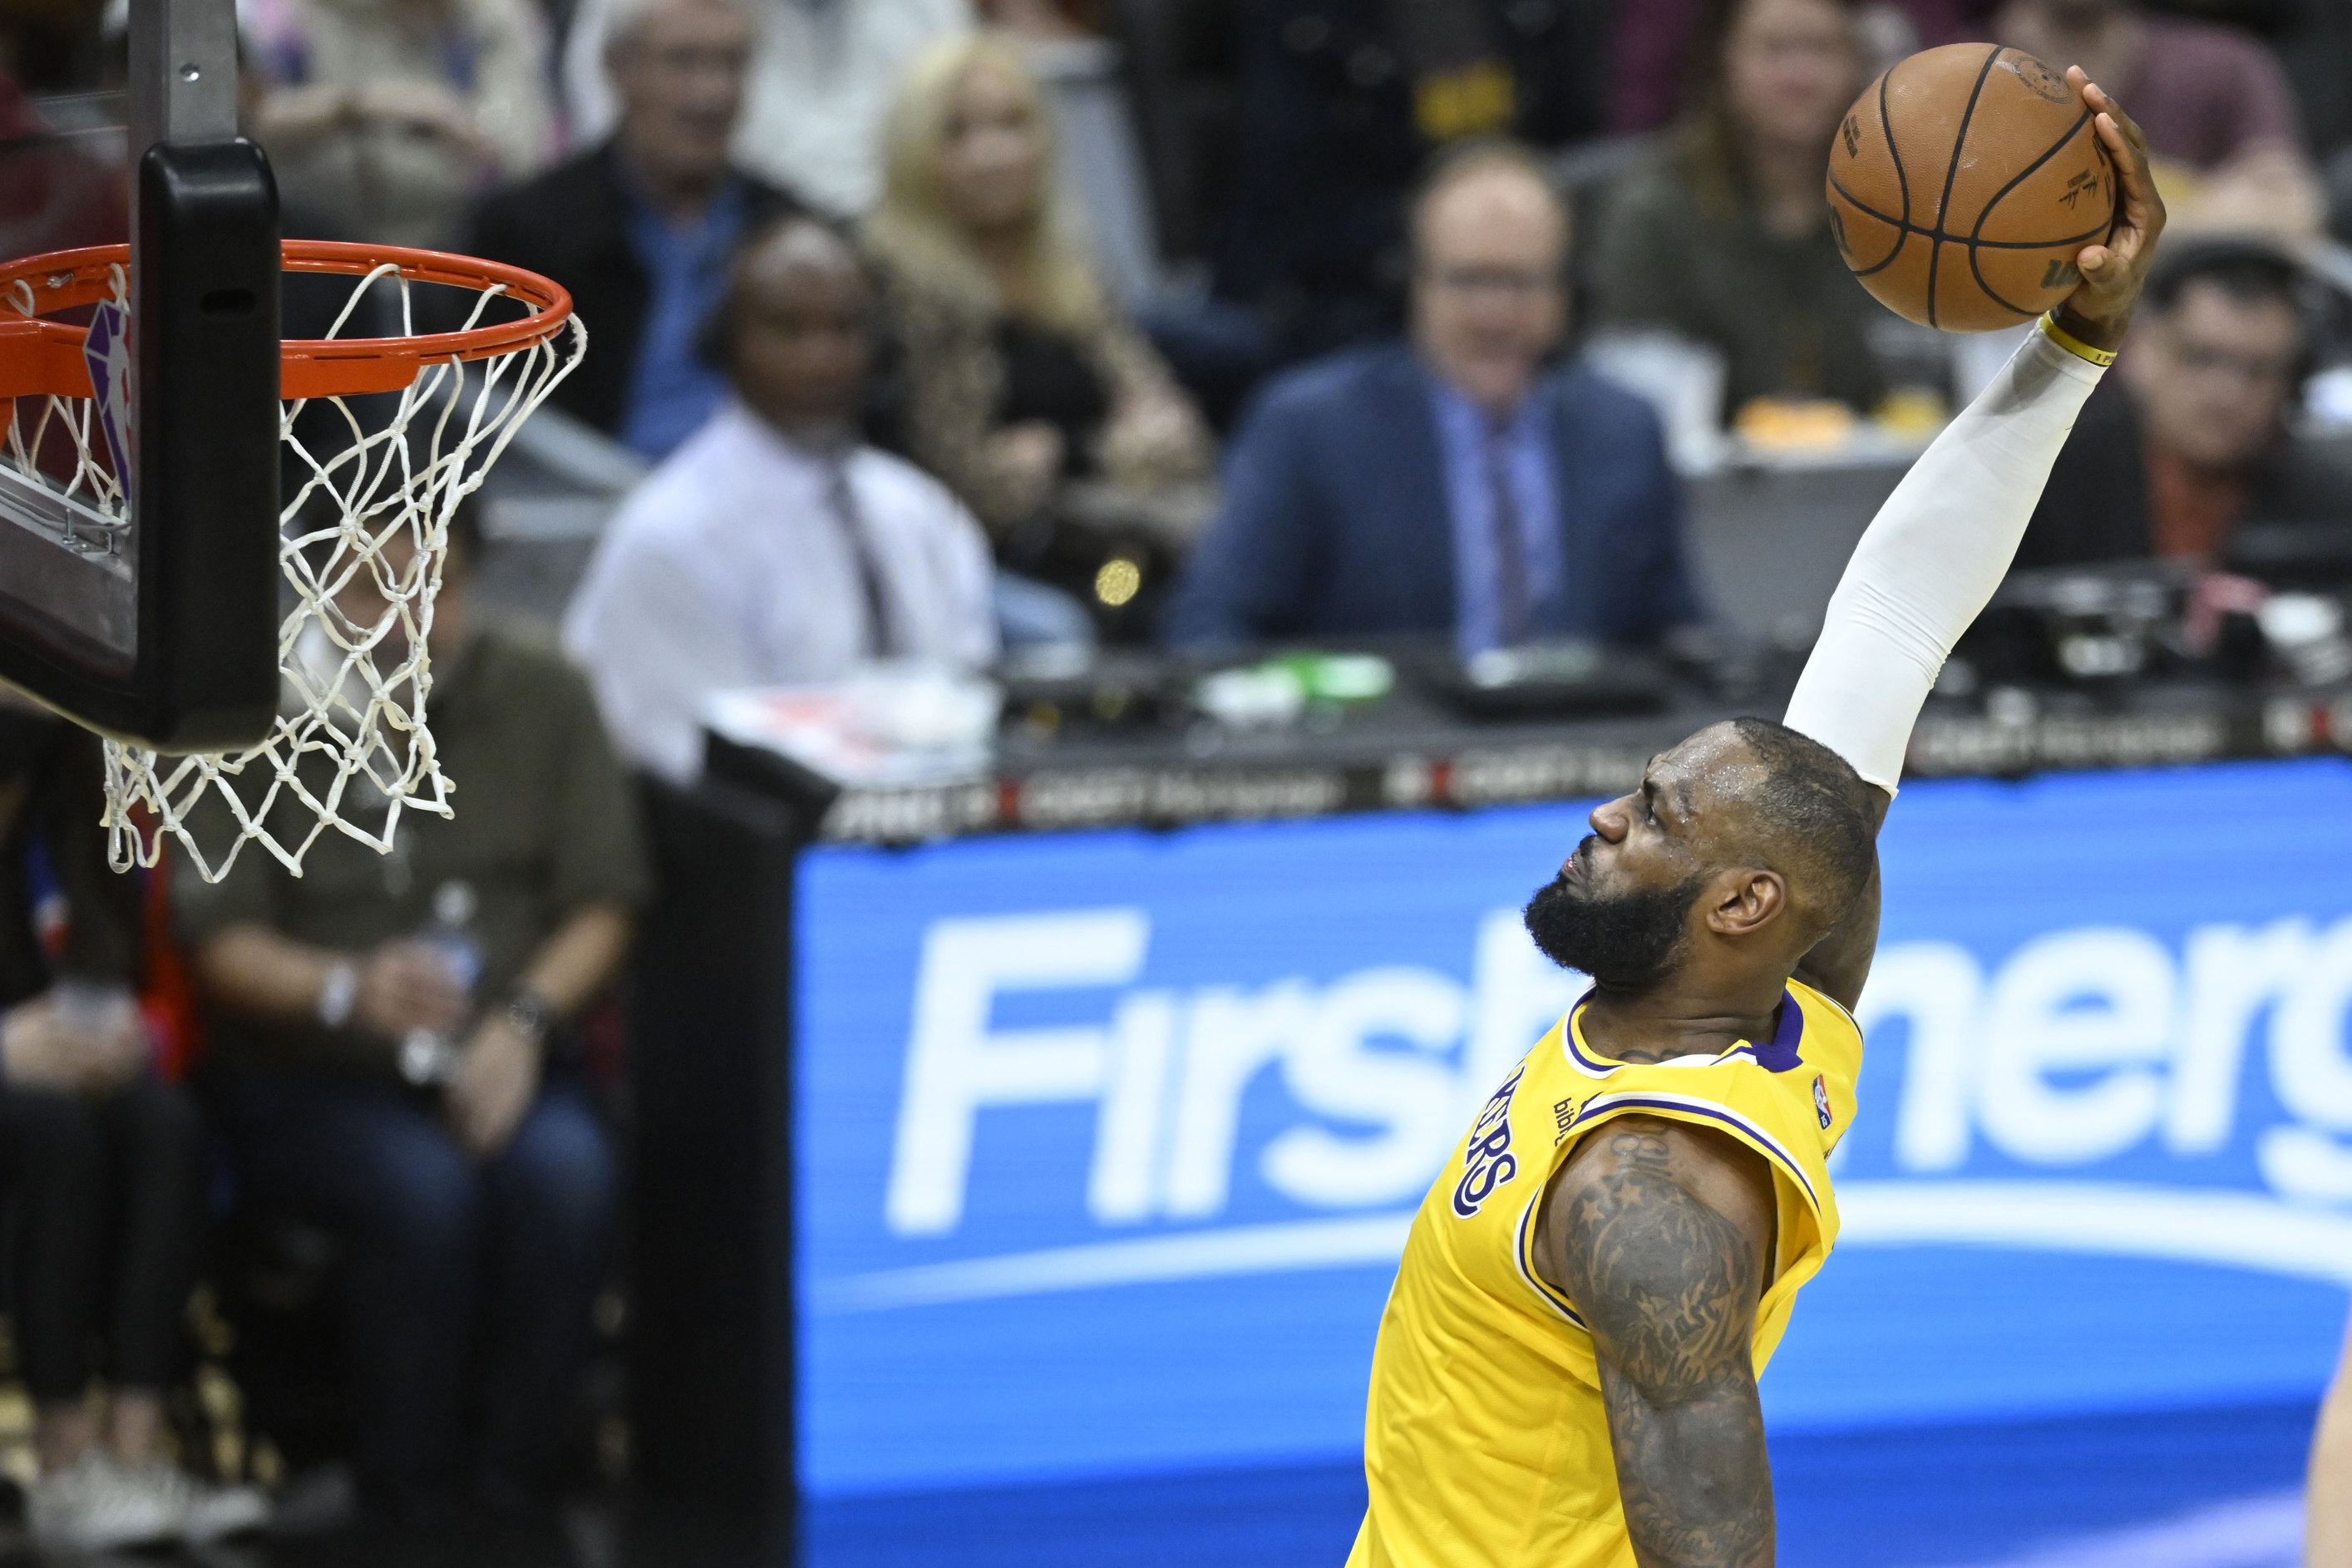 These Stats Suggest LeBron James Is The Greatest Basketball Player